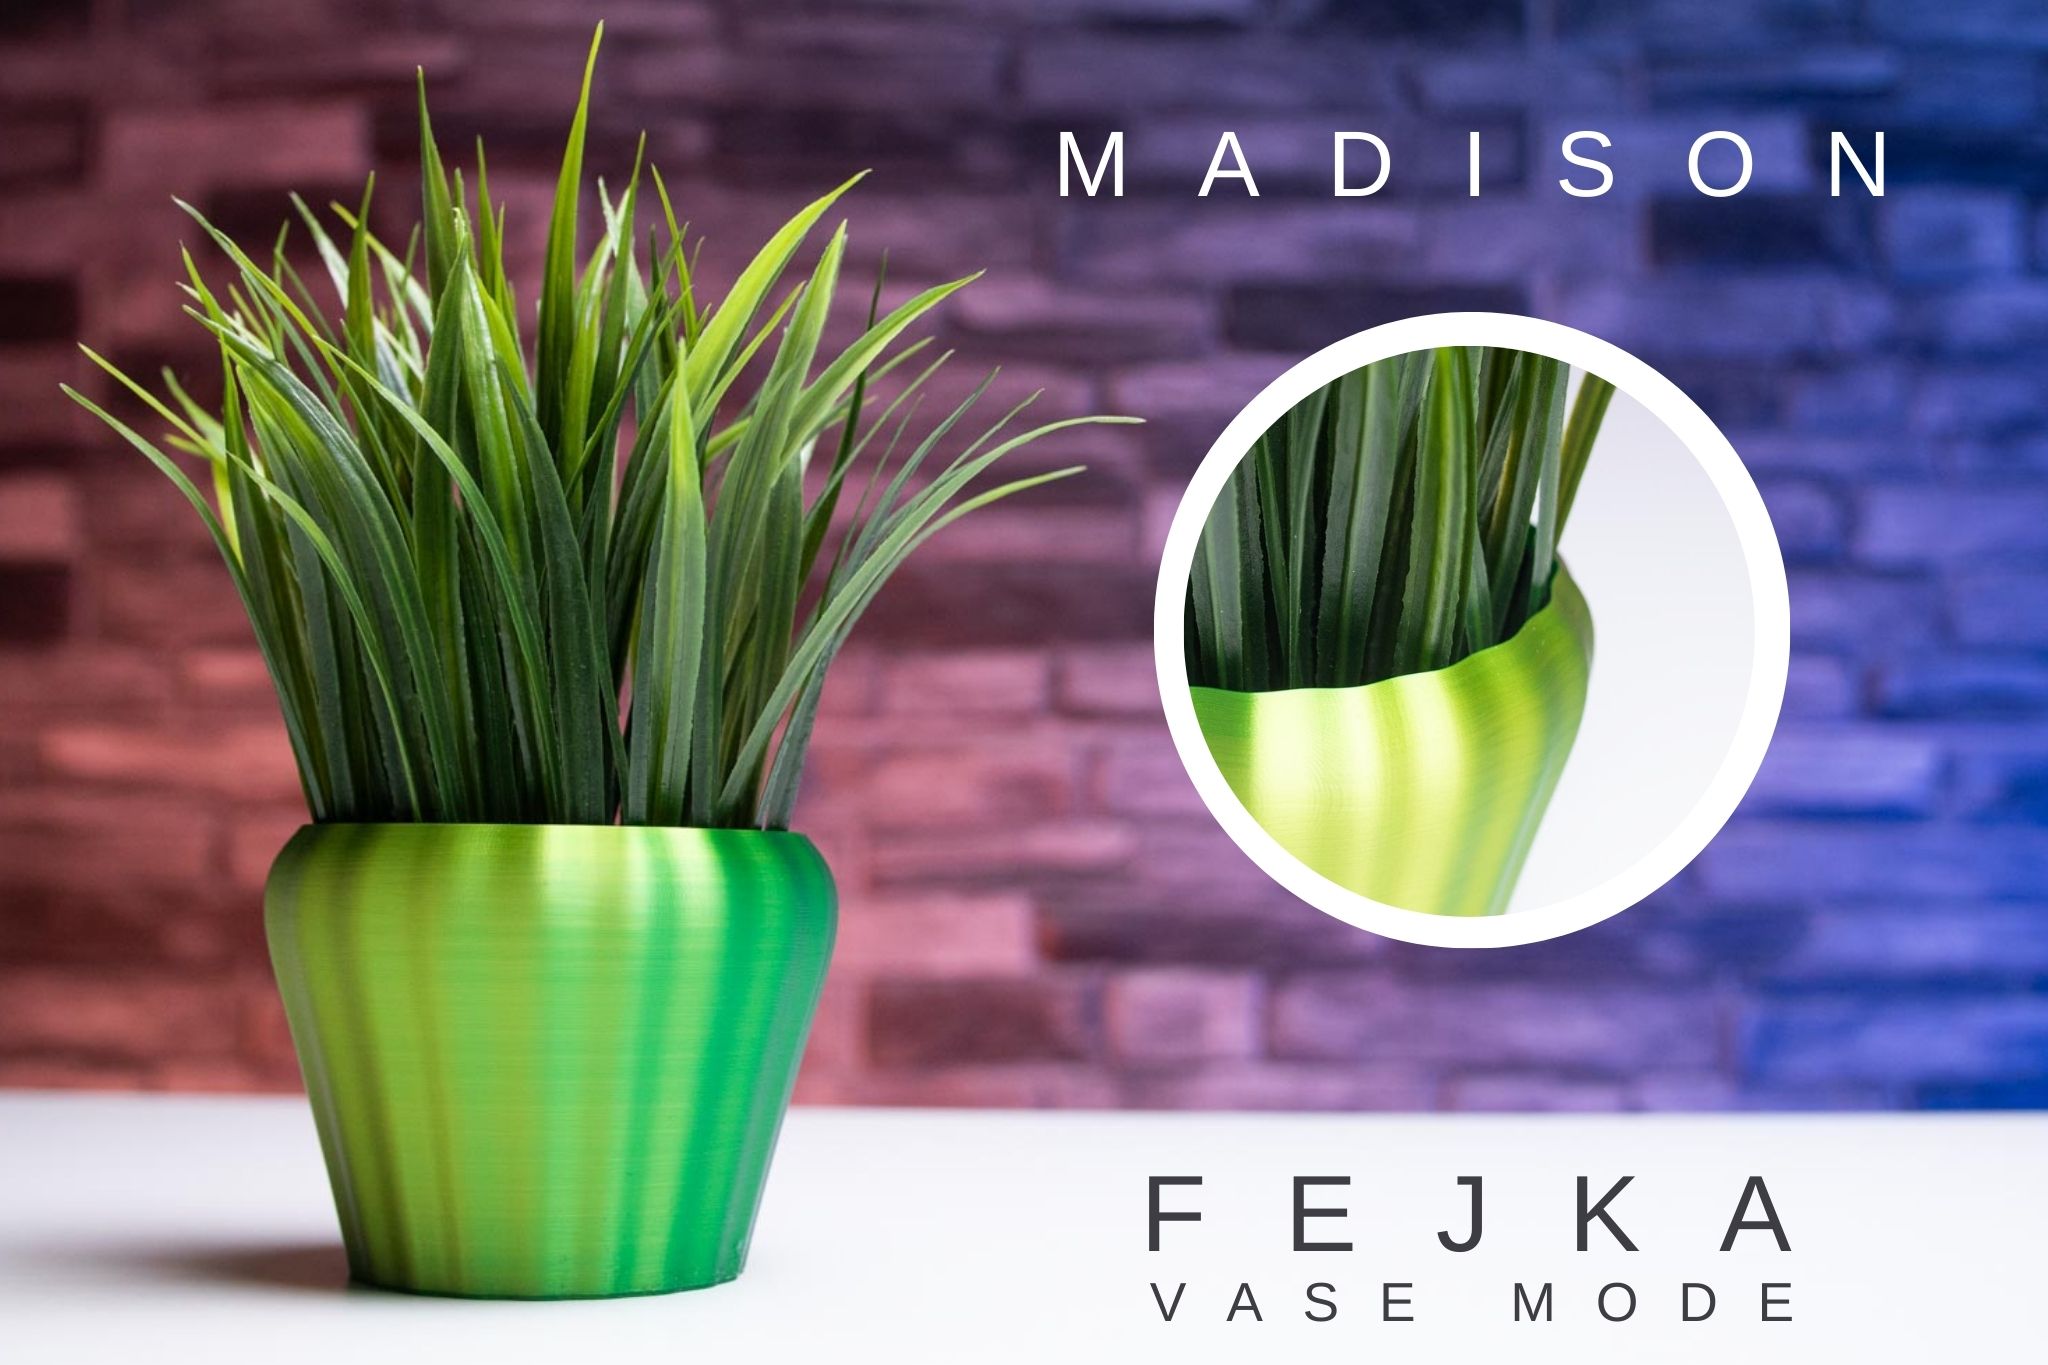 3D Printed Planter and Pot for Ikea Fejka - Vase MADISON